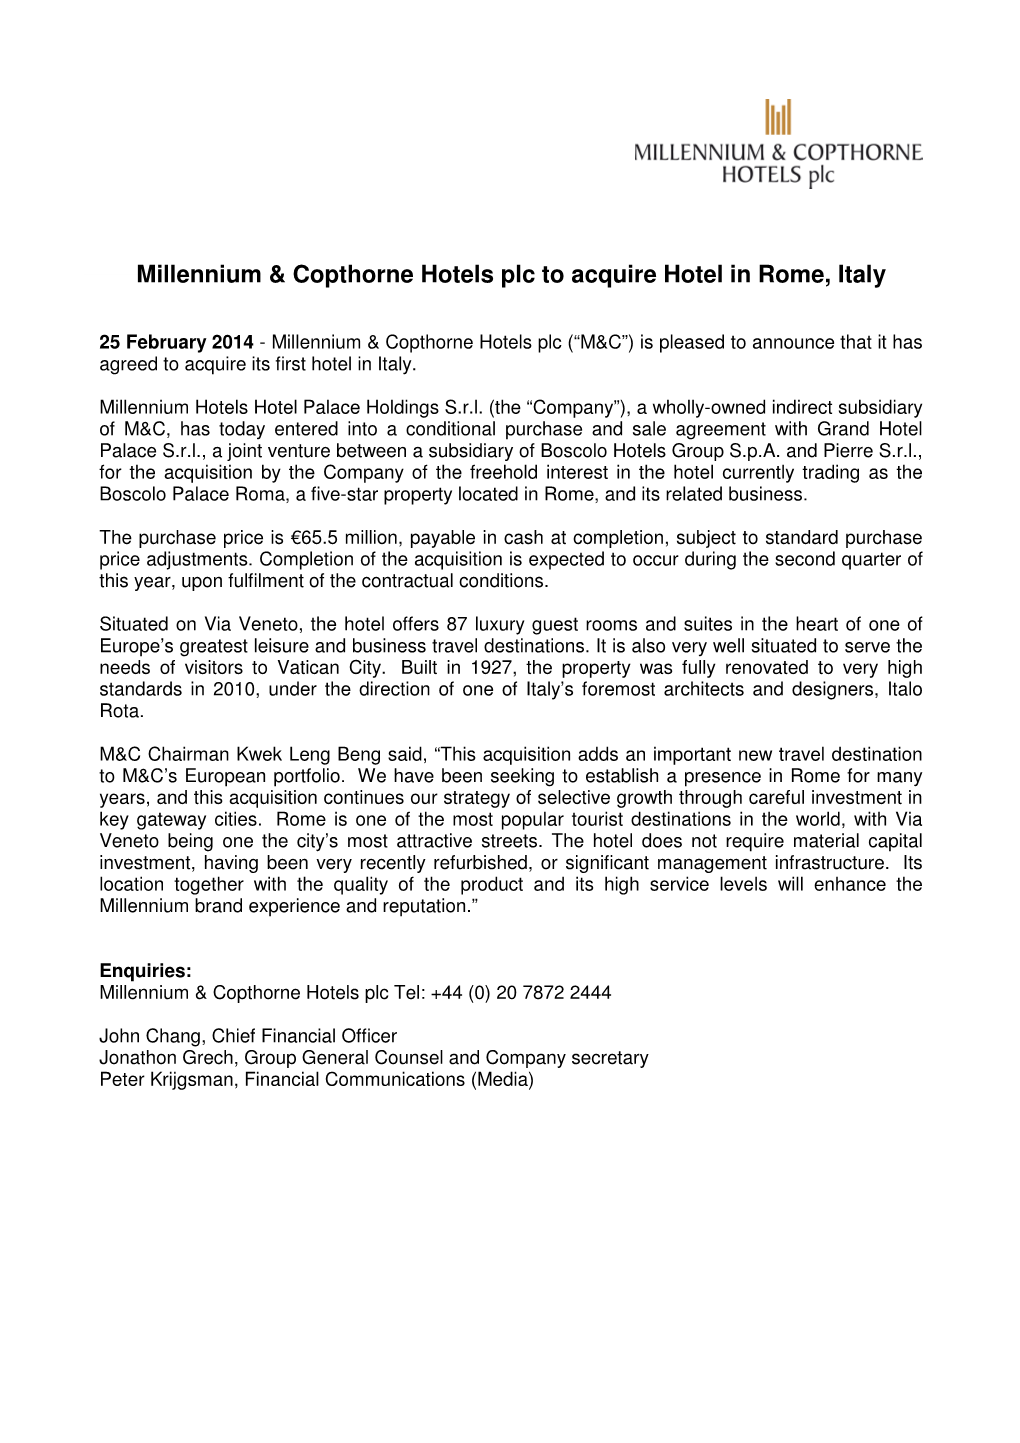 Millennium & Copthorne Hotels Plc to Acquire Hotel in Rome, Italy